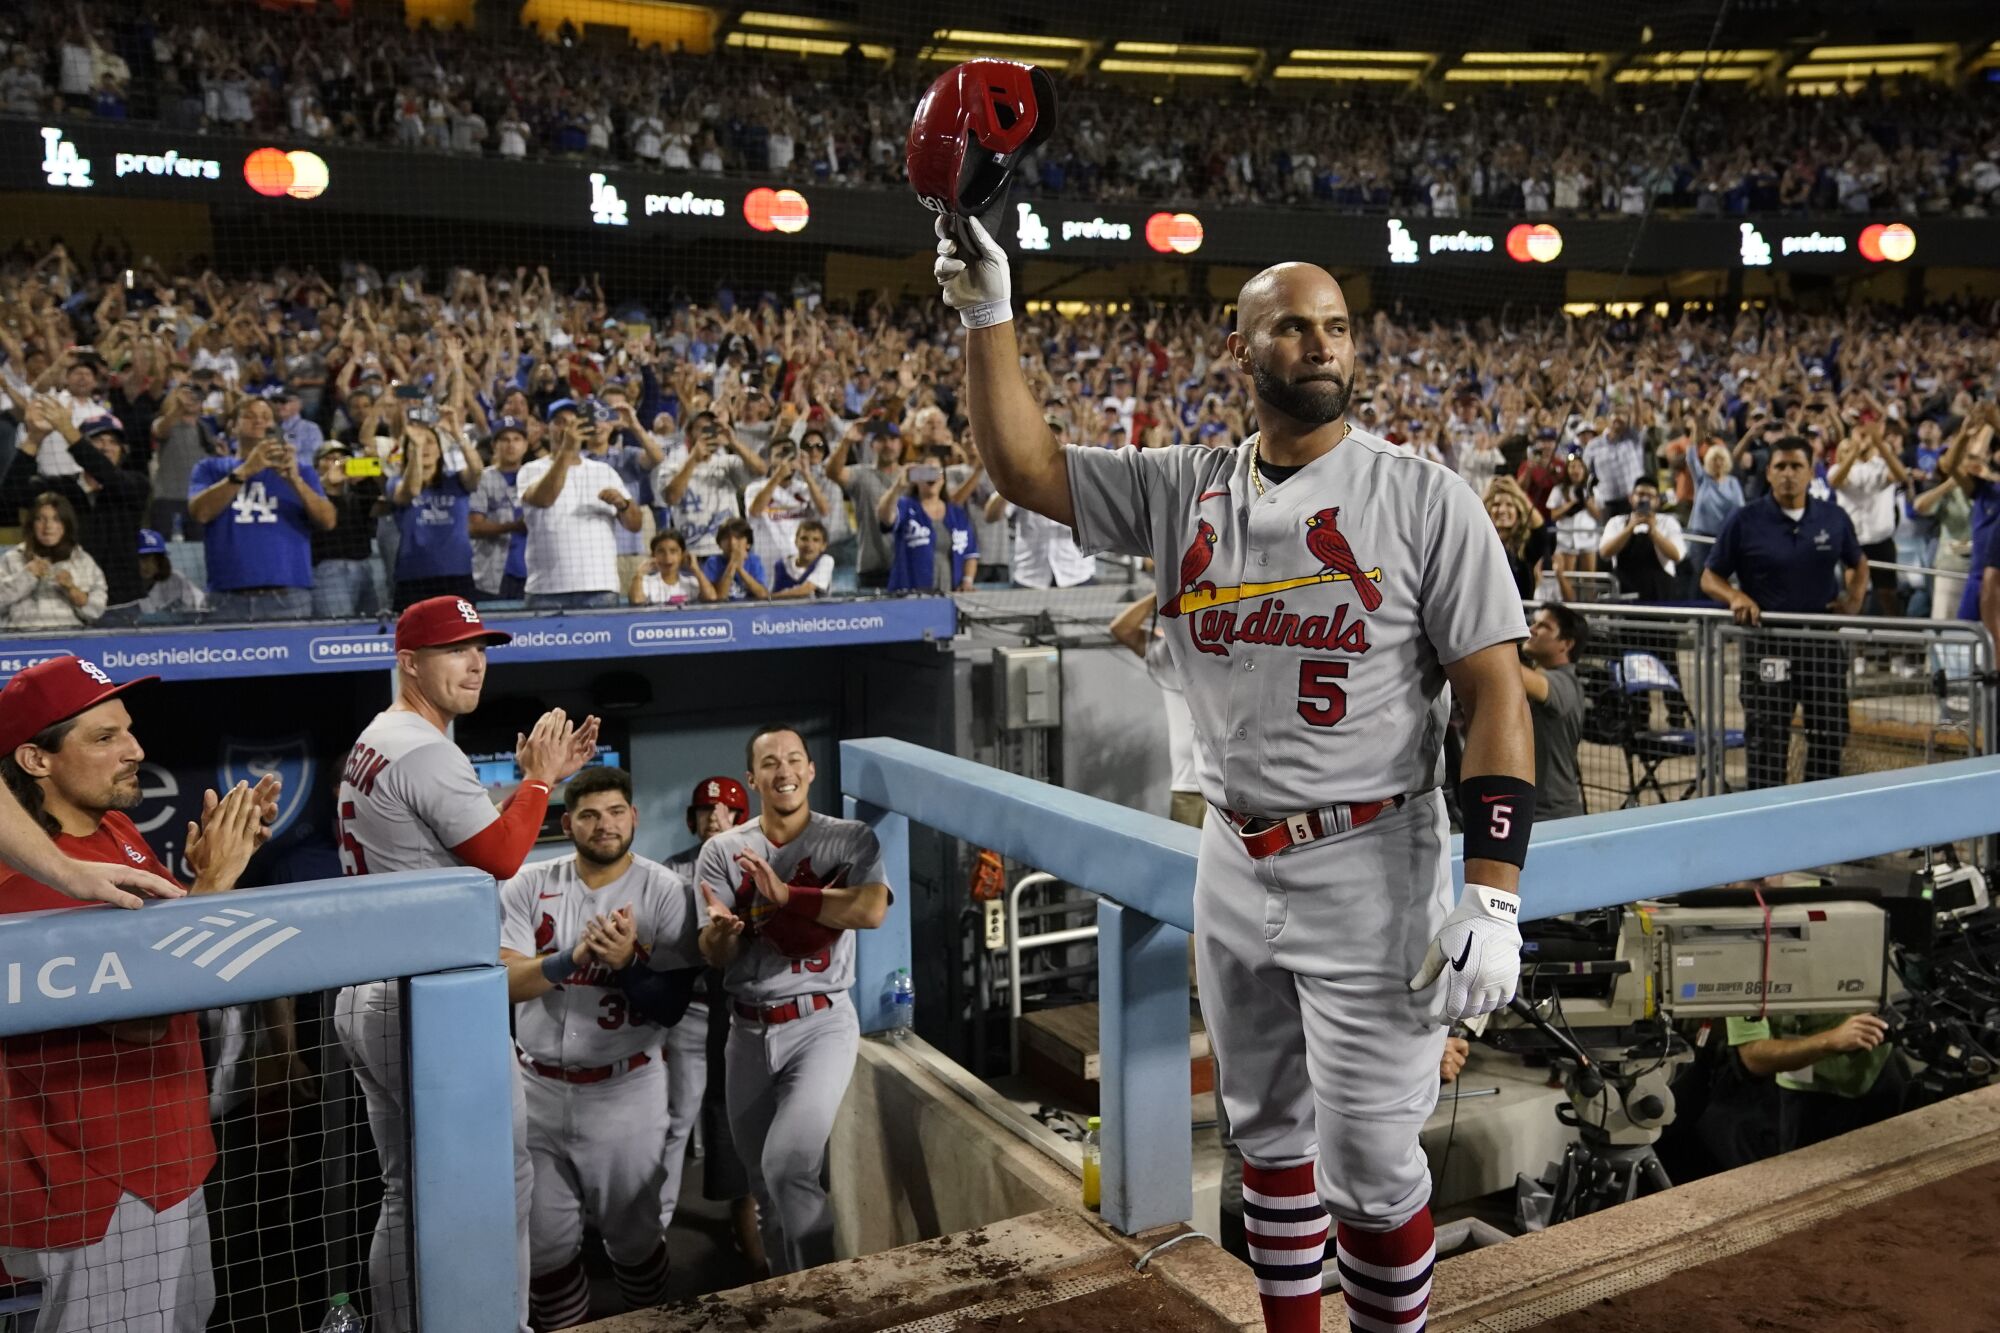 St. Louis Cardinals designated hitter Albert Pujols waves to fans while being honored.